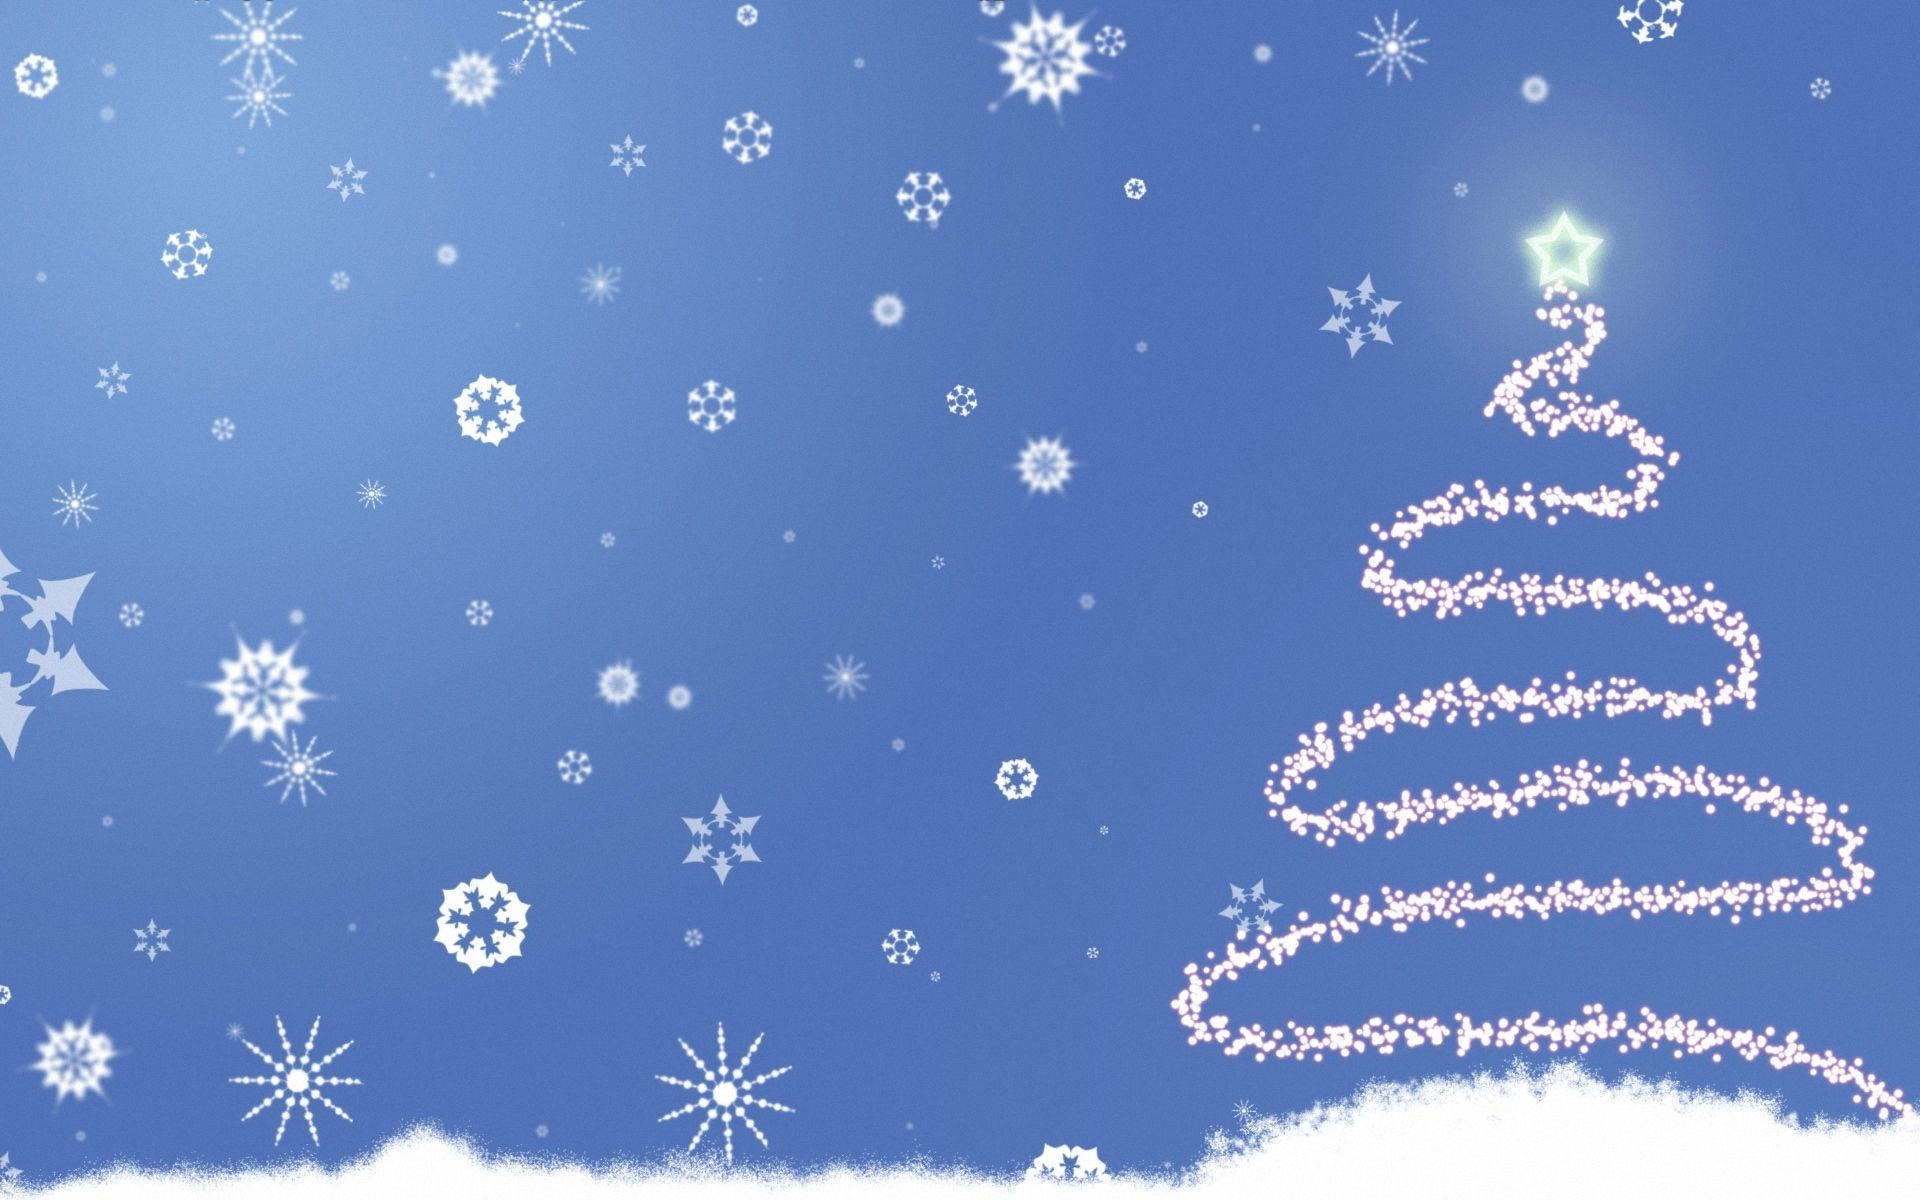 Christmas tree made of snow trail in blue snowy art wallpaper.